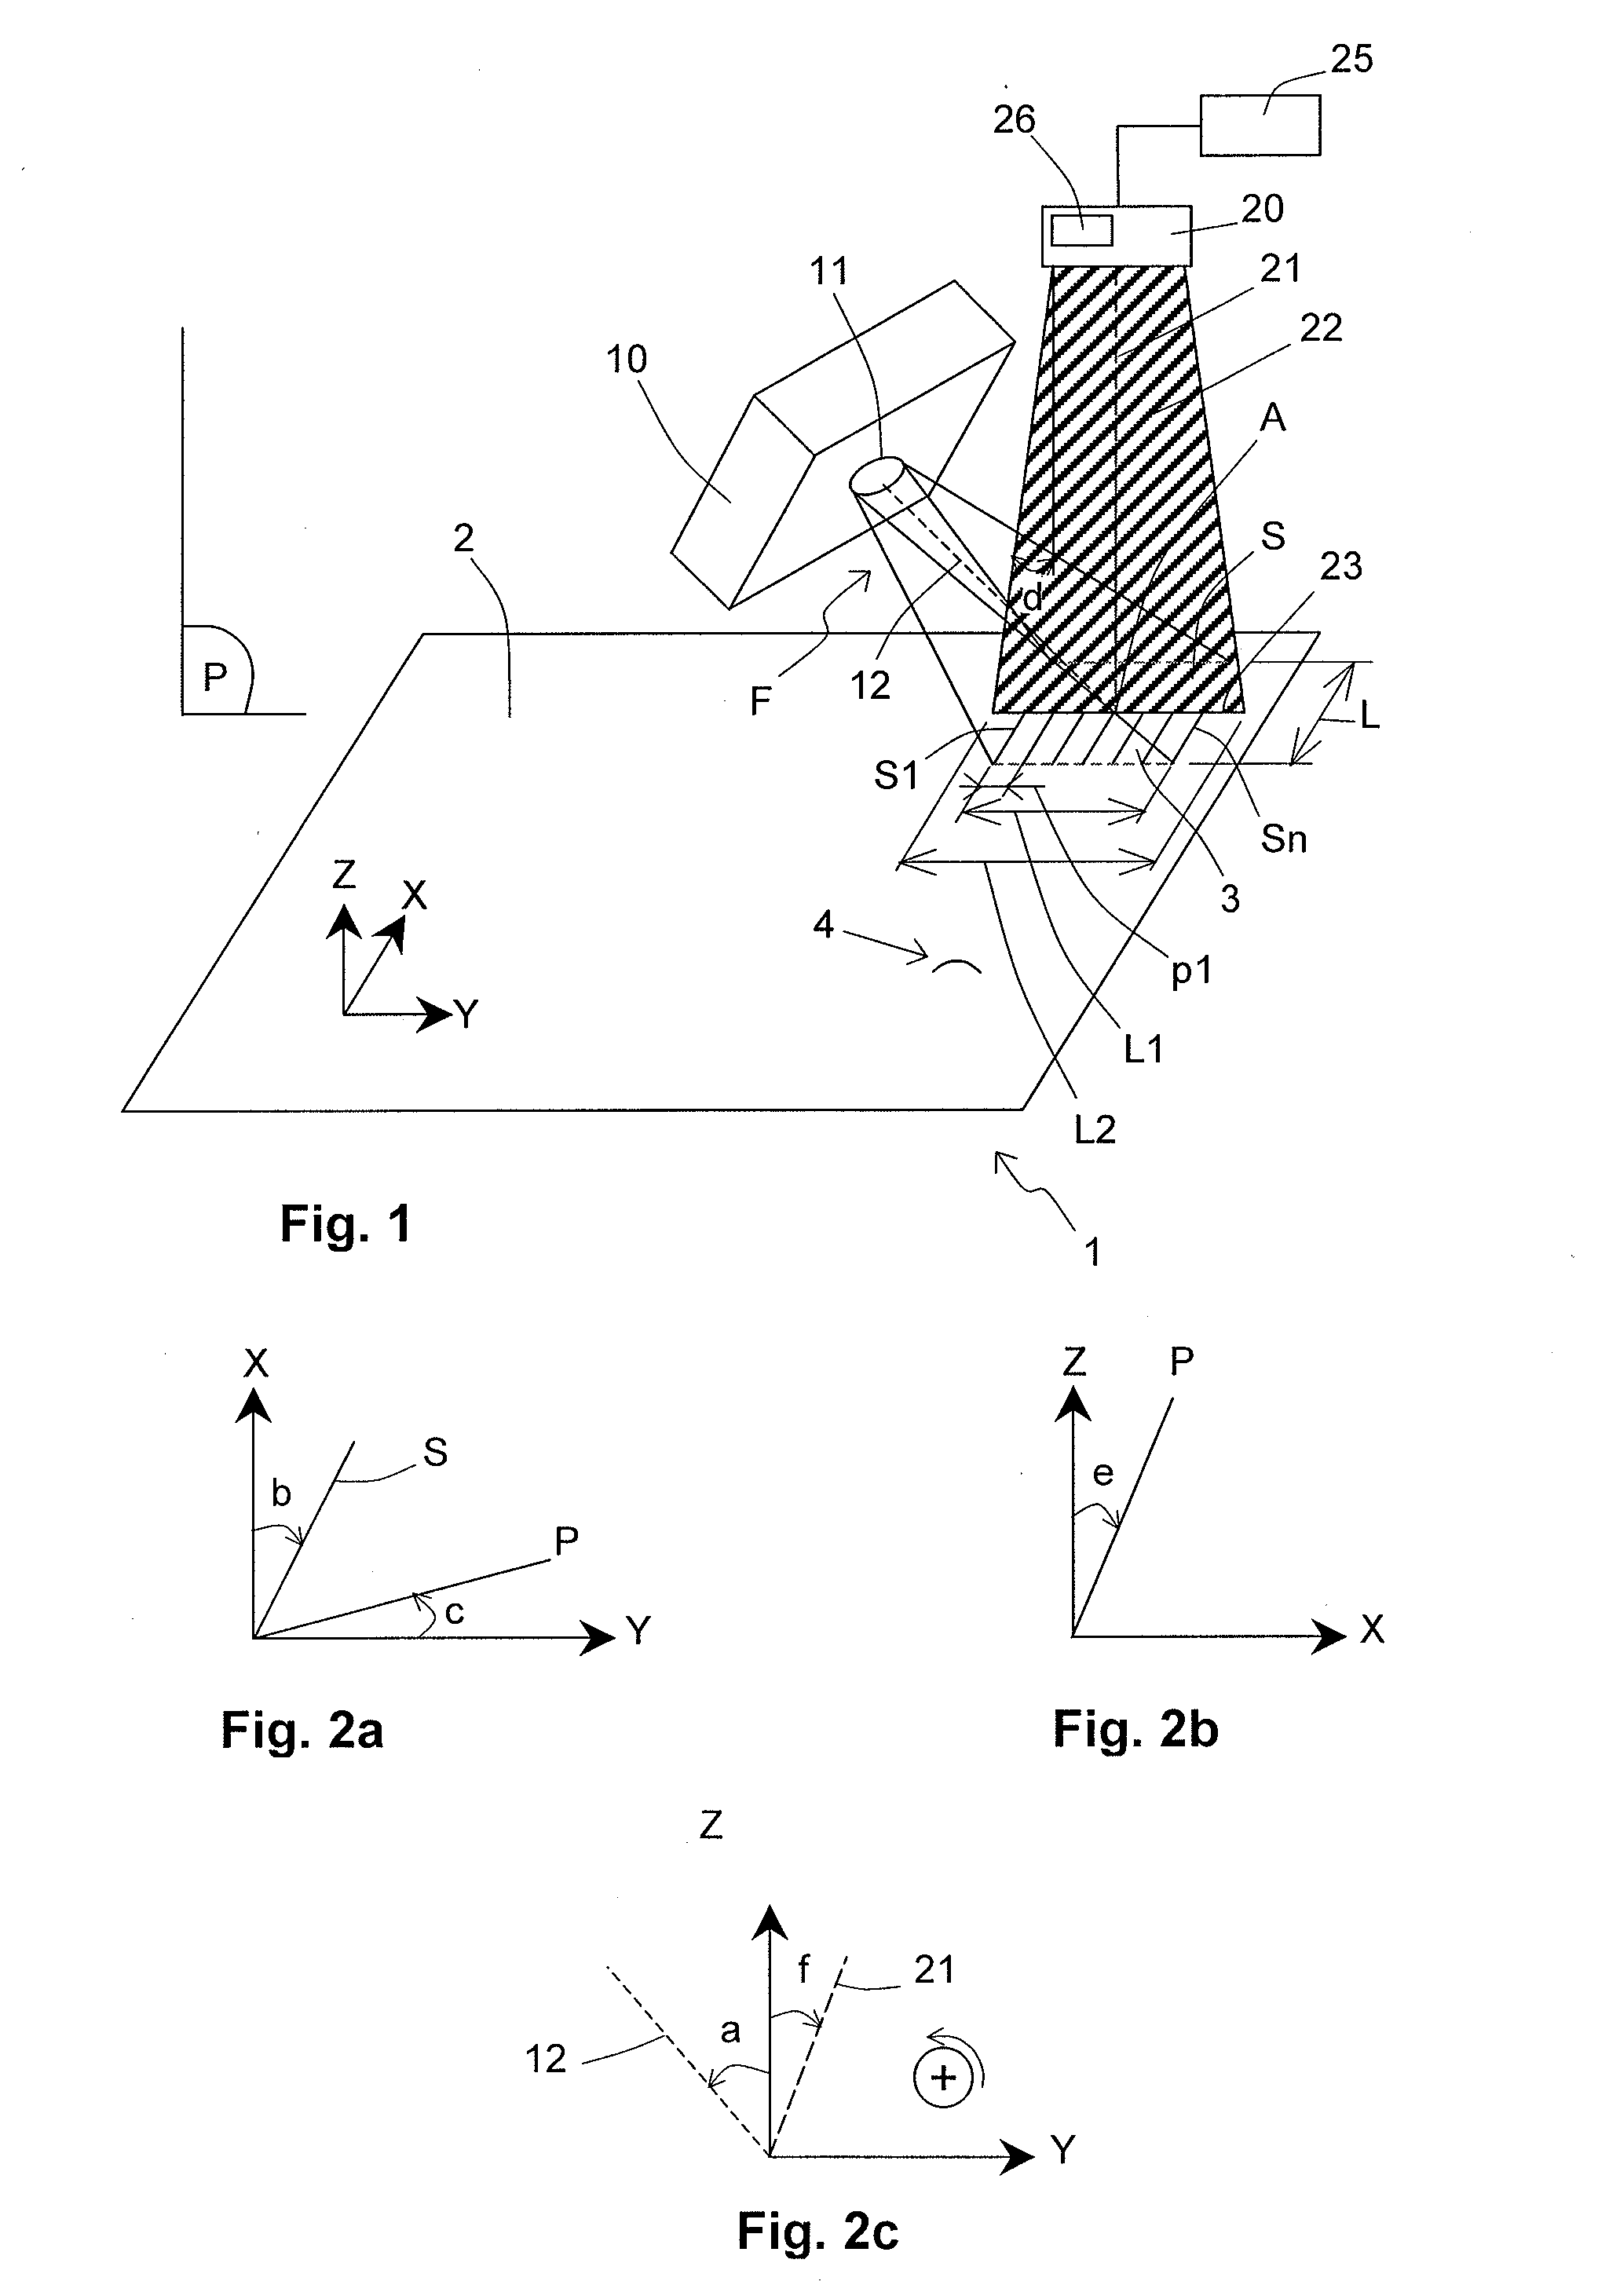 Topography device for a surface of a substrate